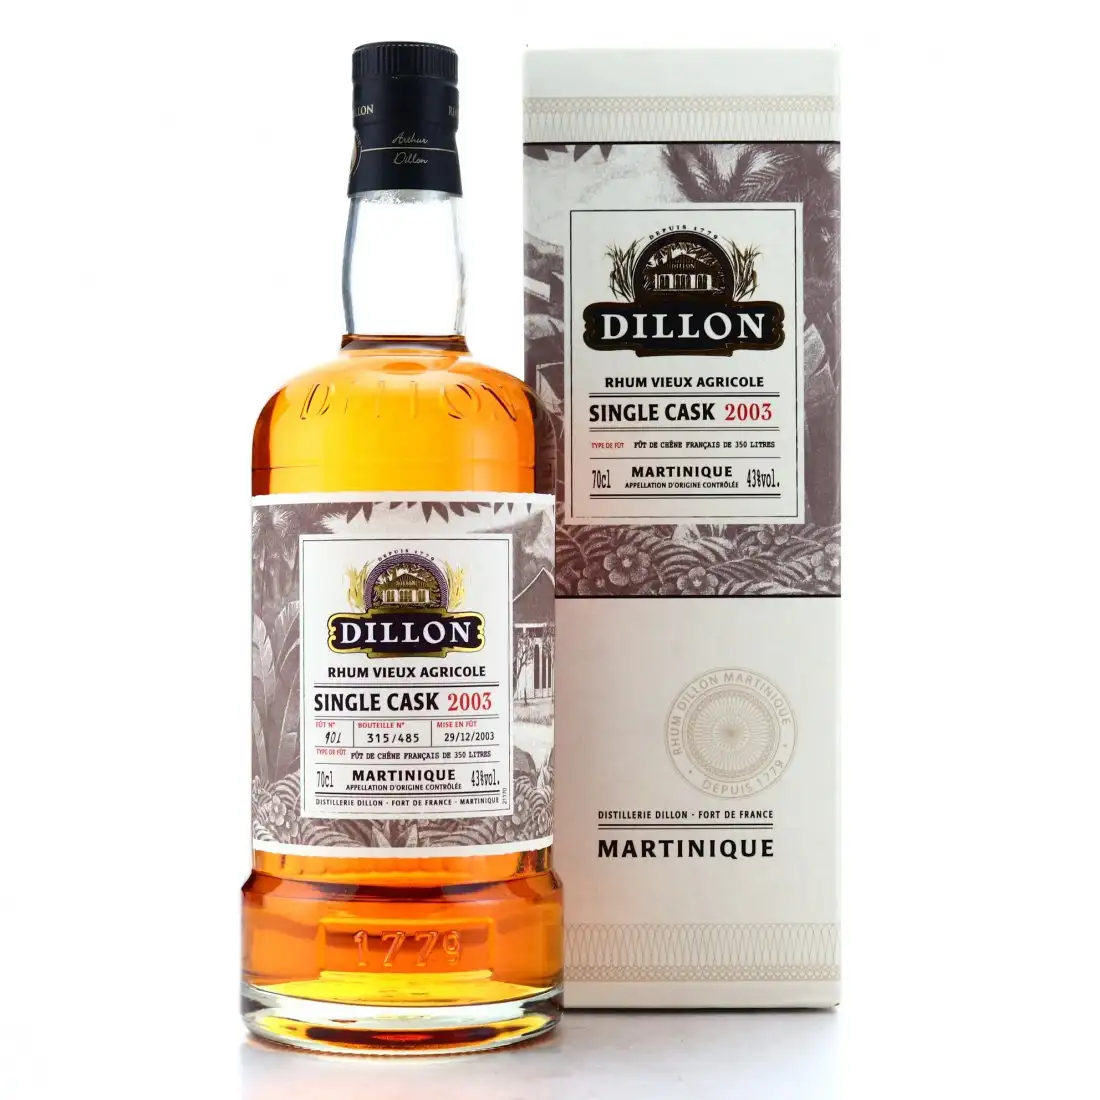 Image of the front of the bottle of the rum Dillon Single Cask